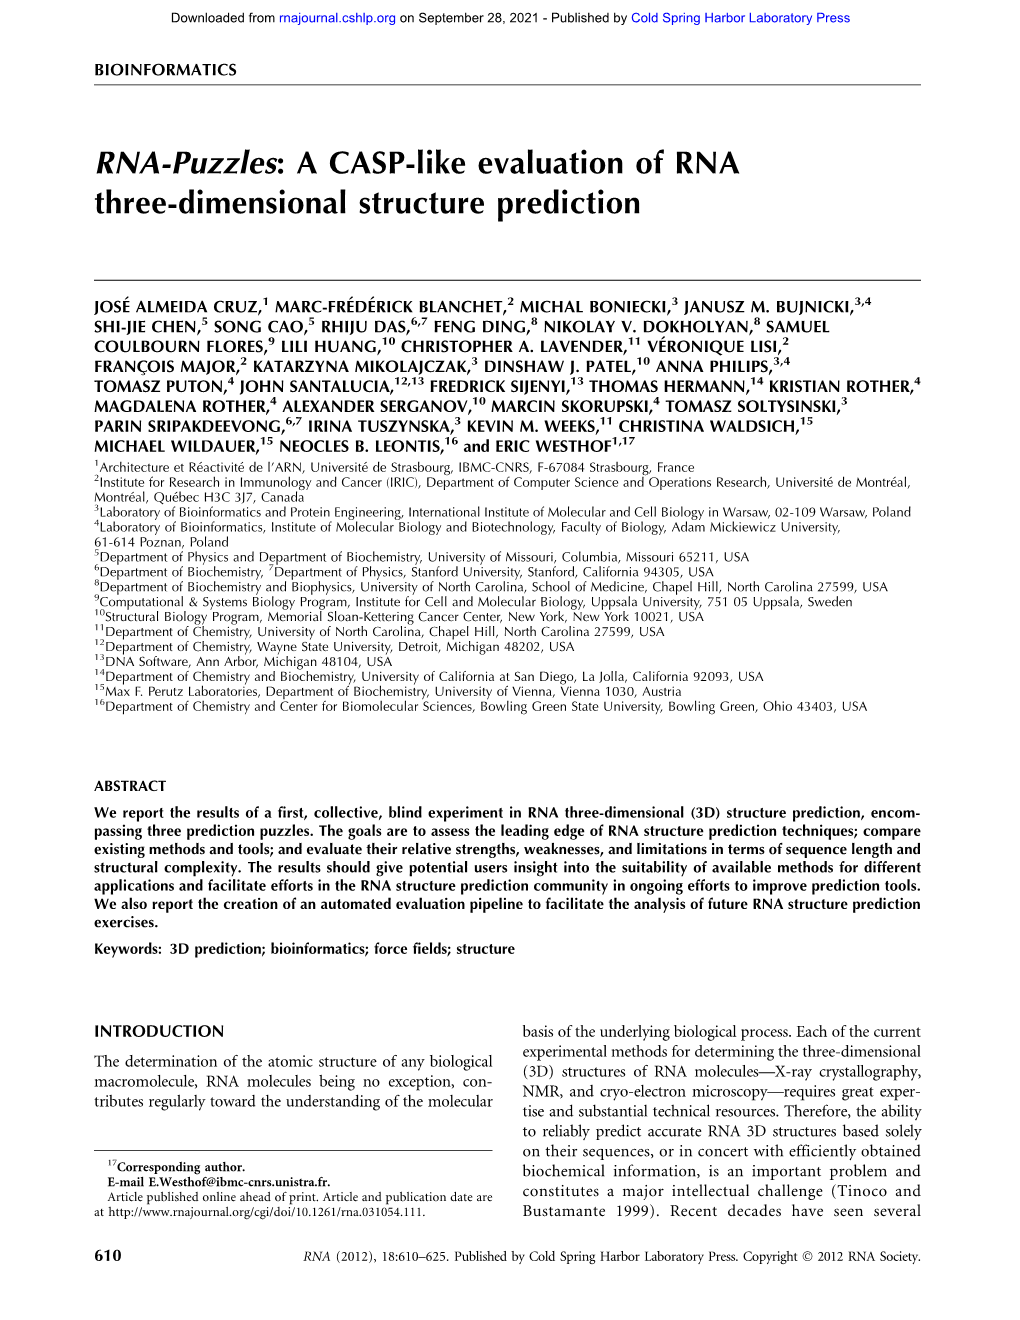 A CASP-Like Evaluation of RNA Three-Dimensional Structure Prediction